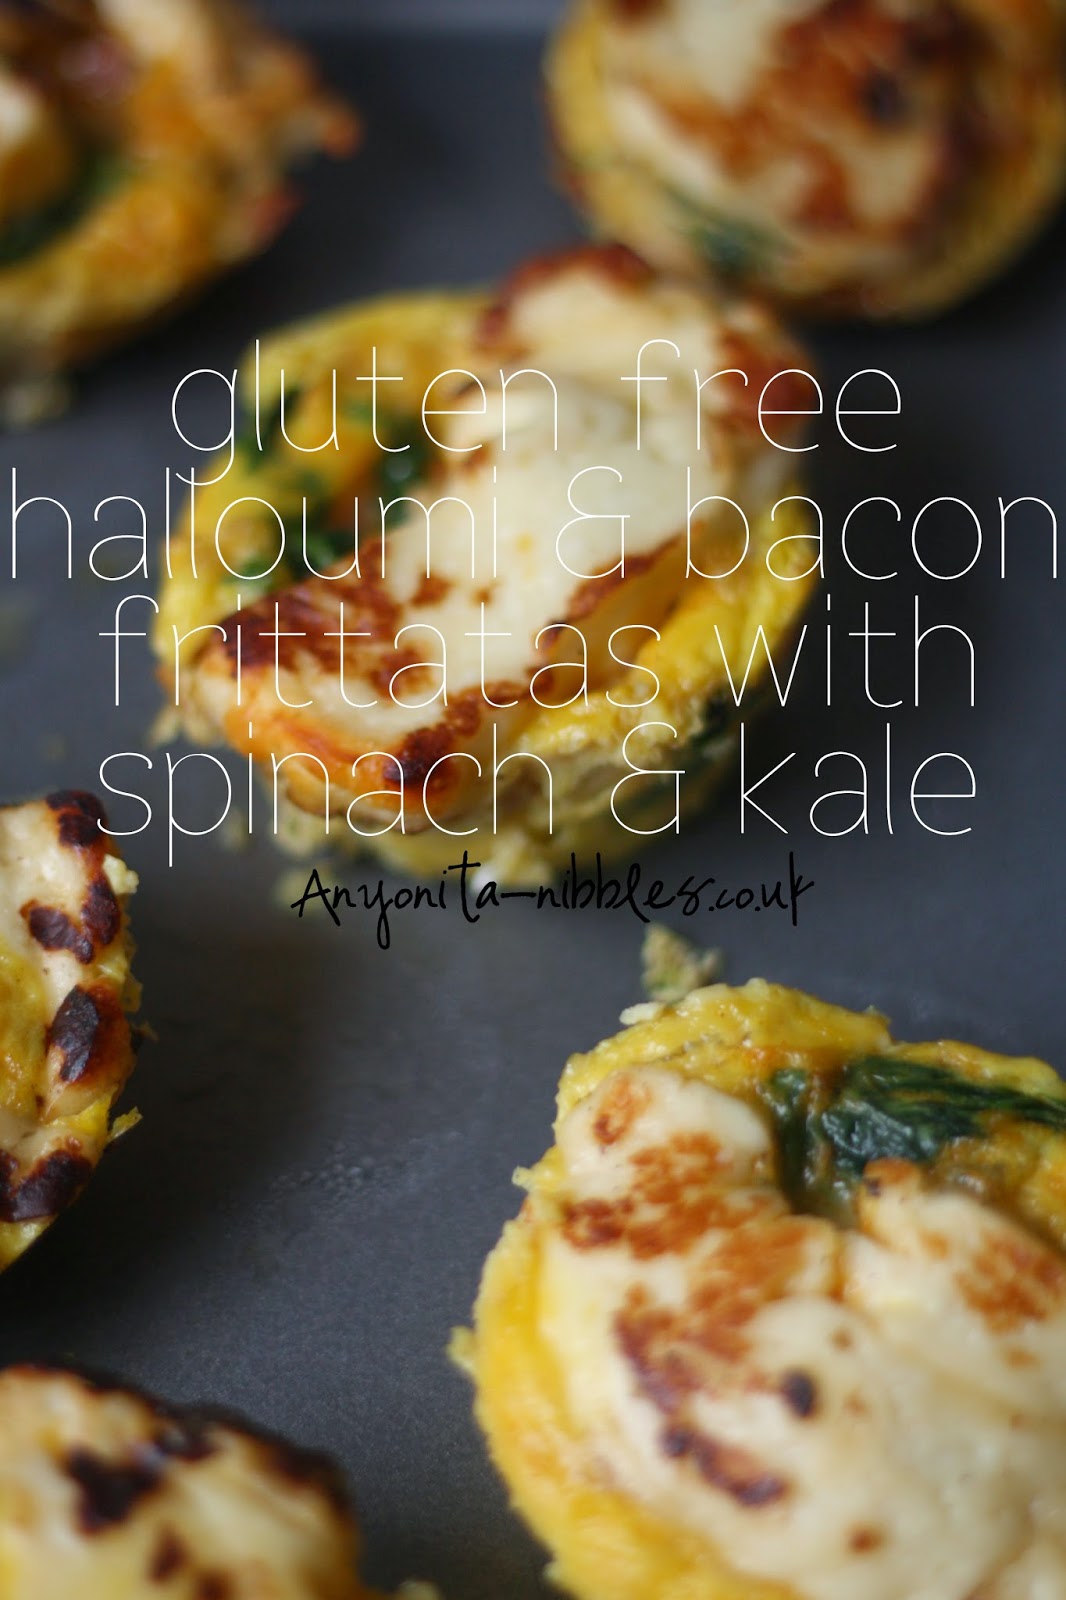 Gluten Free Halloumi & Bacon Frittatas with Spinach & Kale from Anyonita-nibbles.co.uk